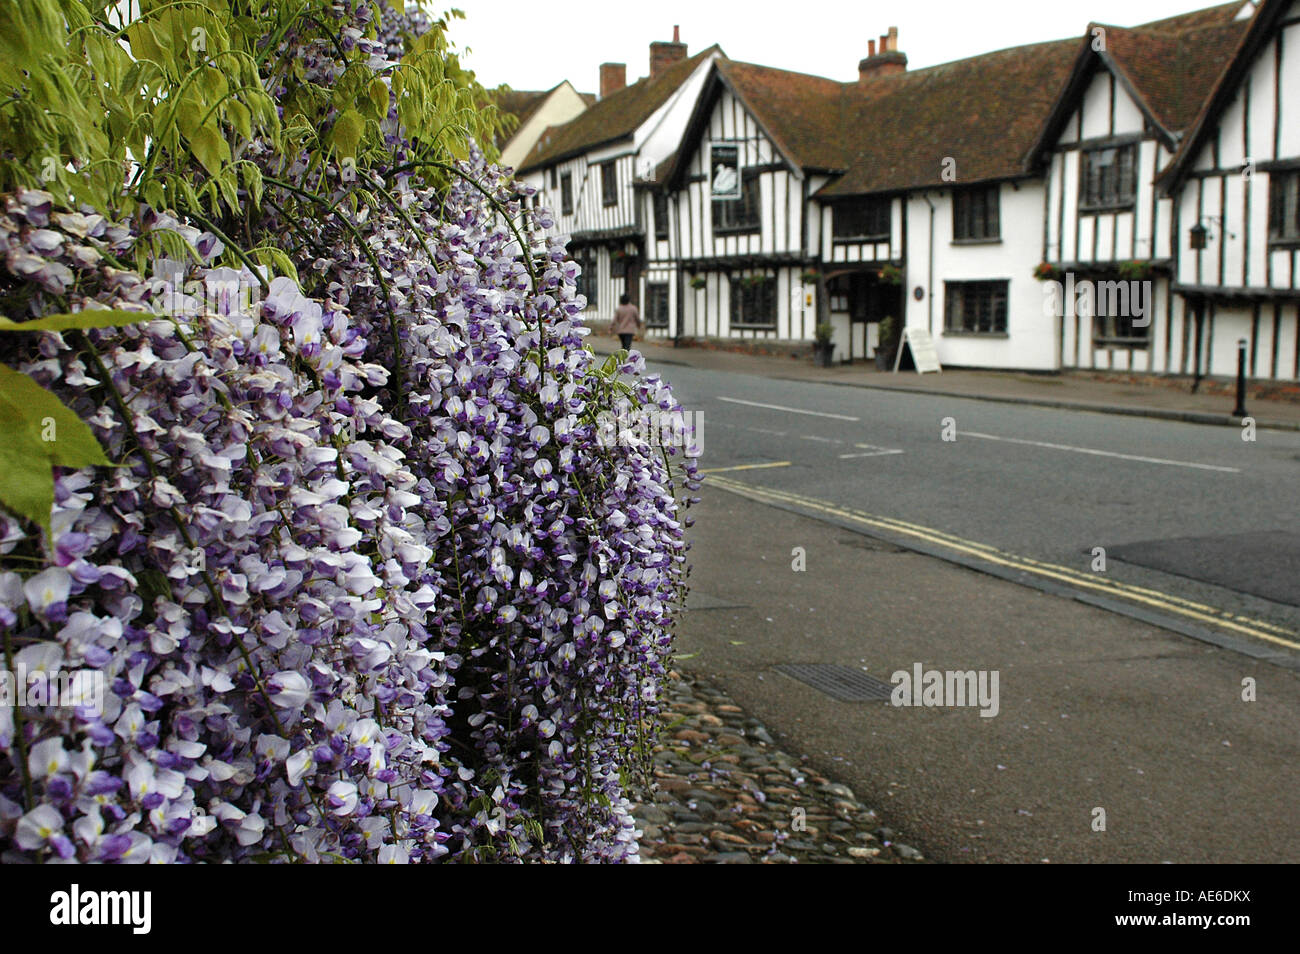 Wisteria in an English country village Stock Photo